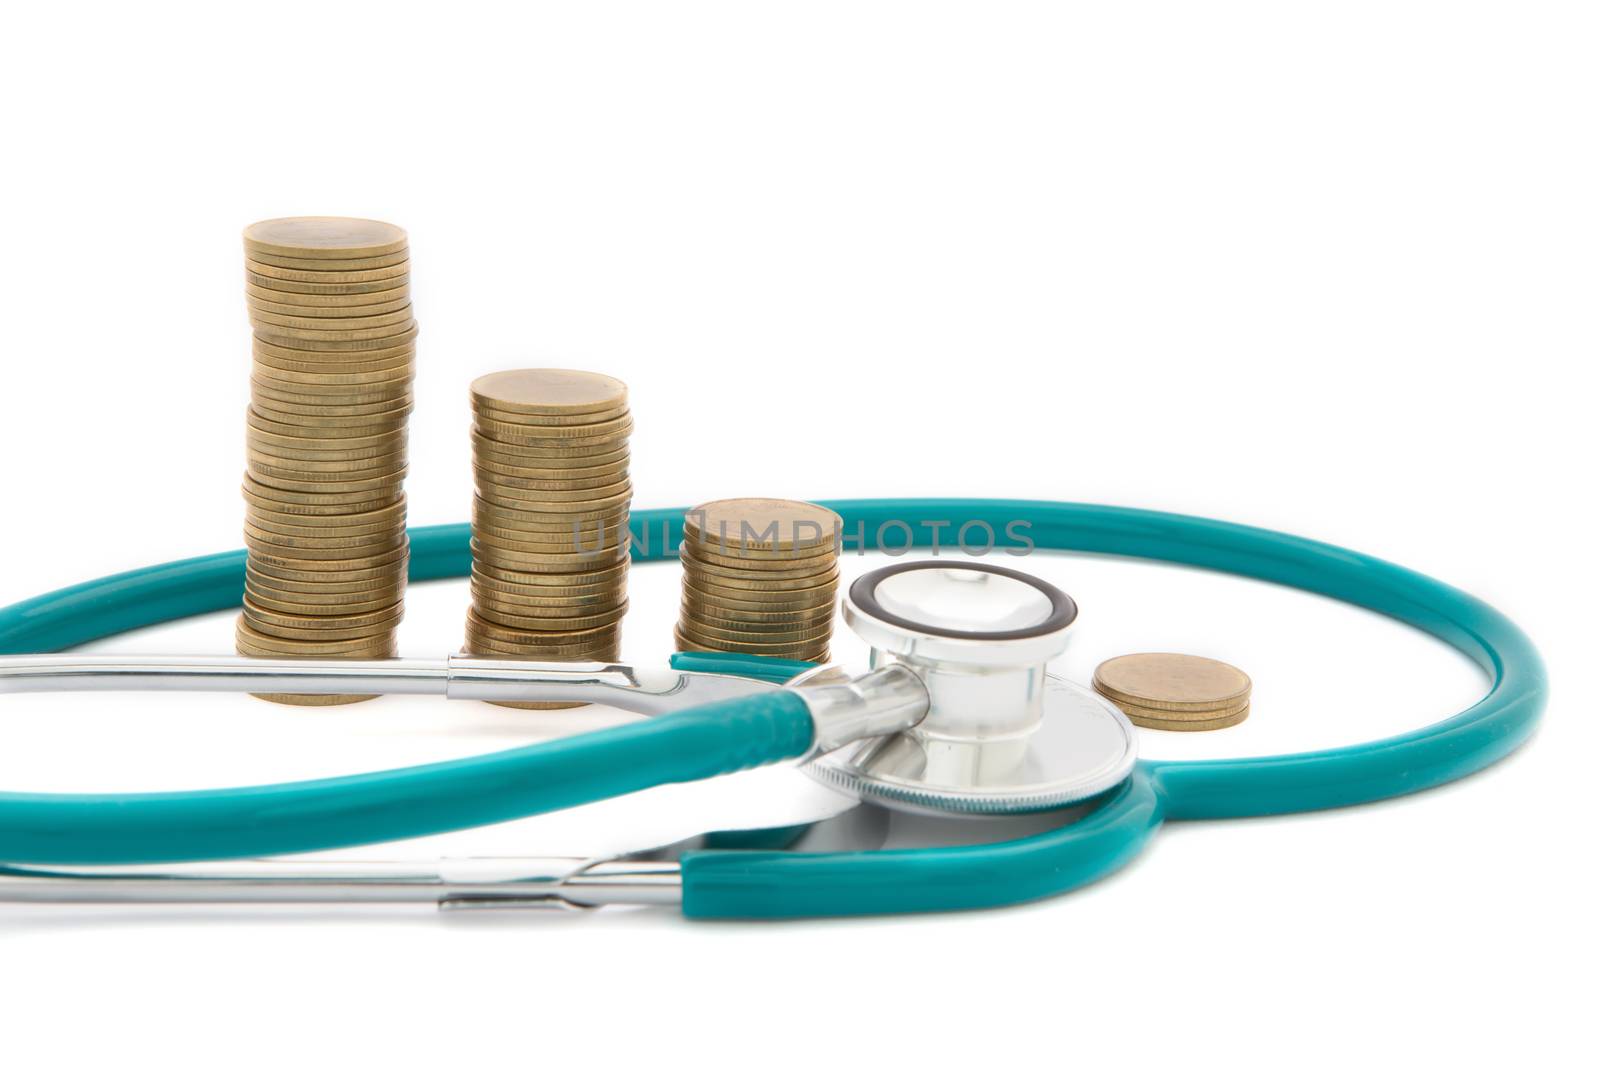 Stethoscope over coins. Concept of saving bad economy